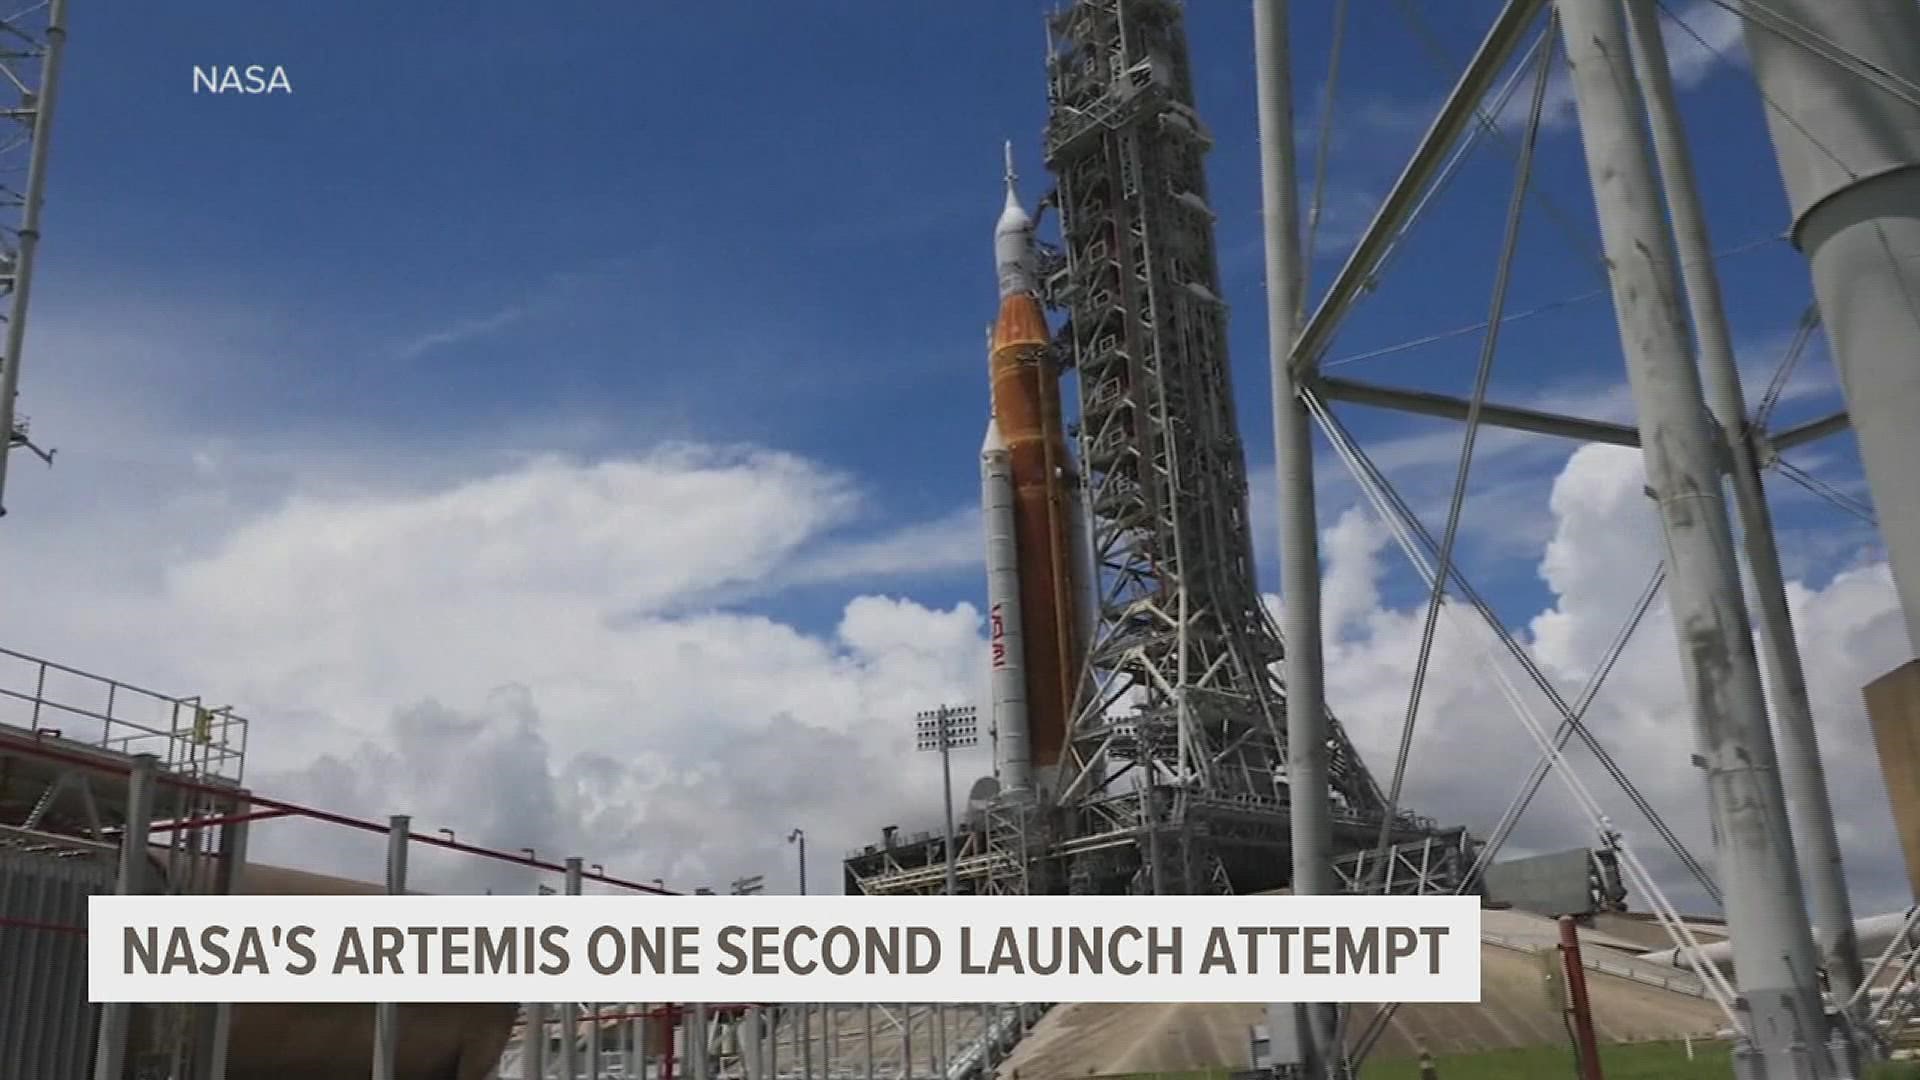 They are hoping to launch the unmanned rocket this weekend.